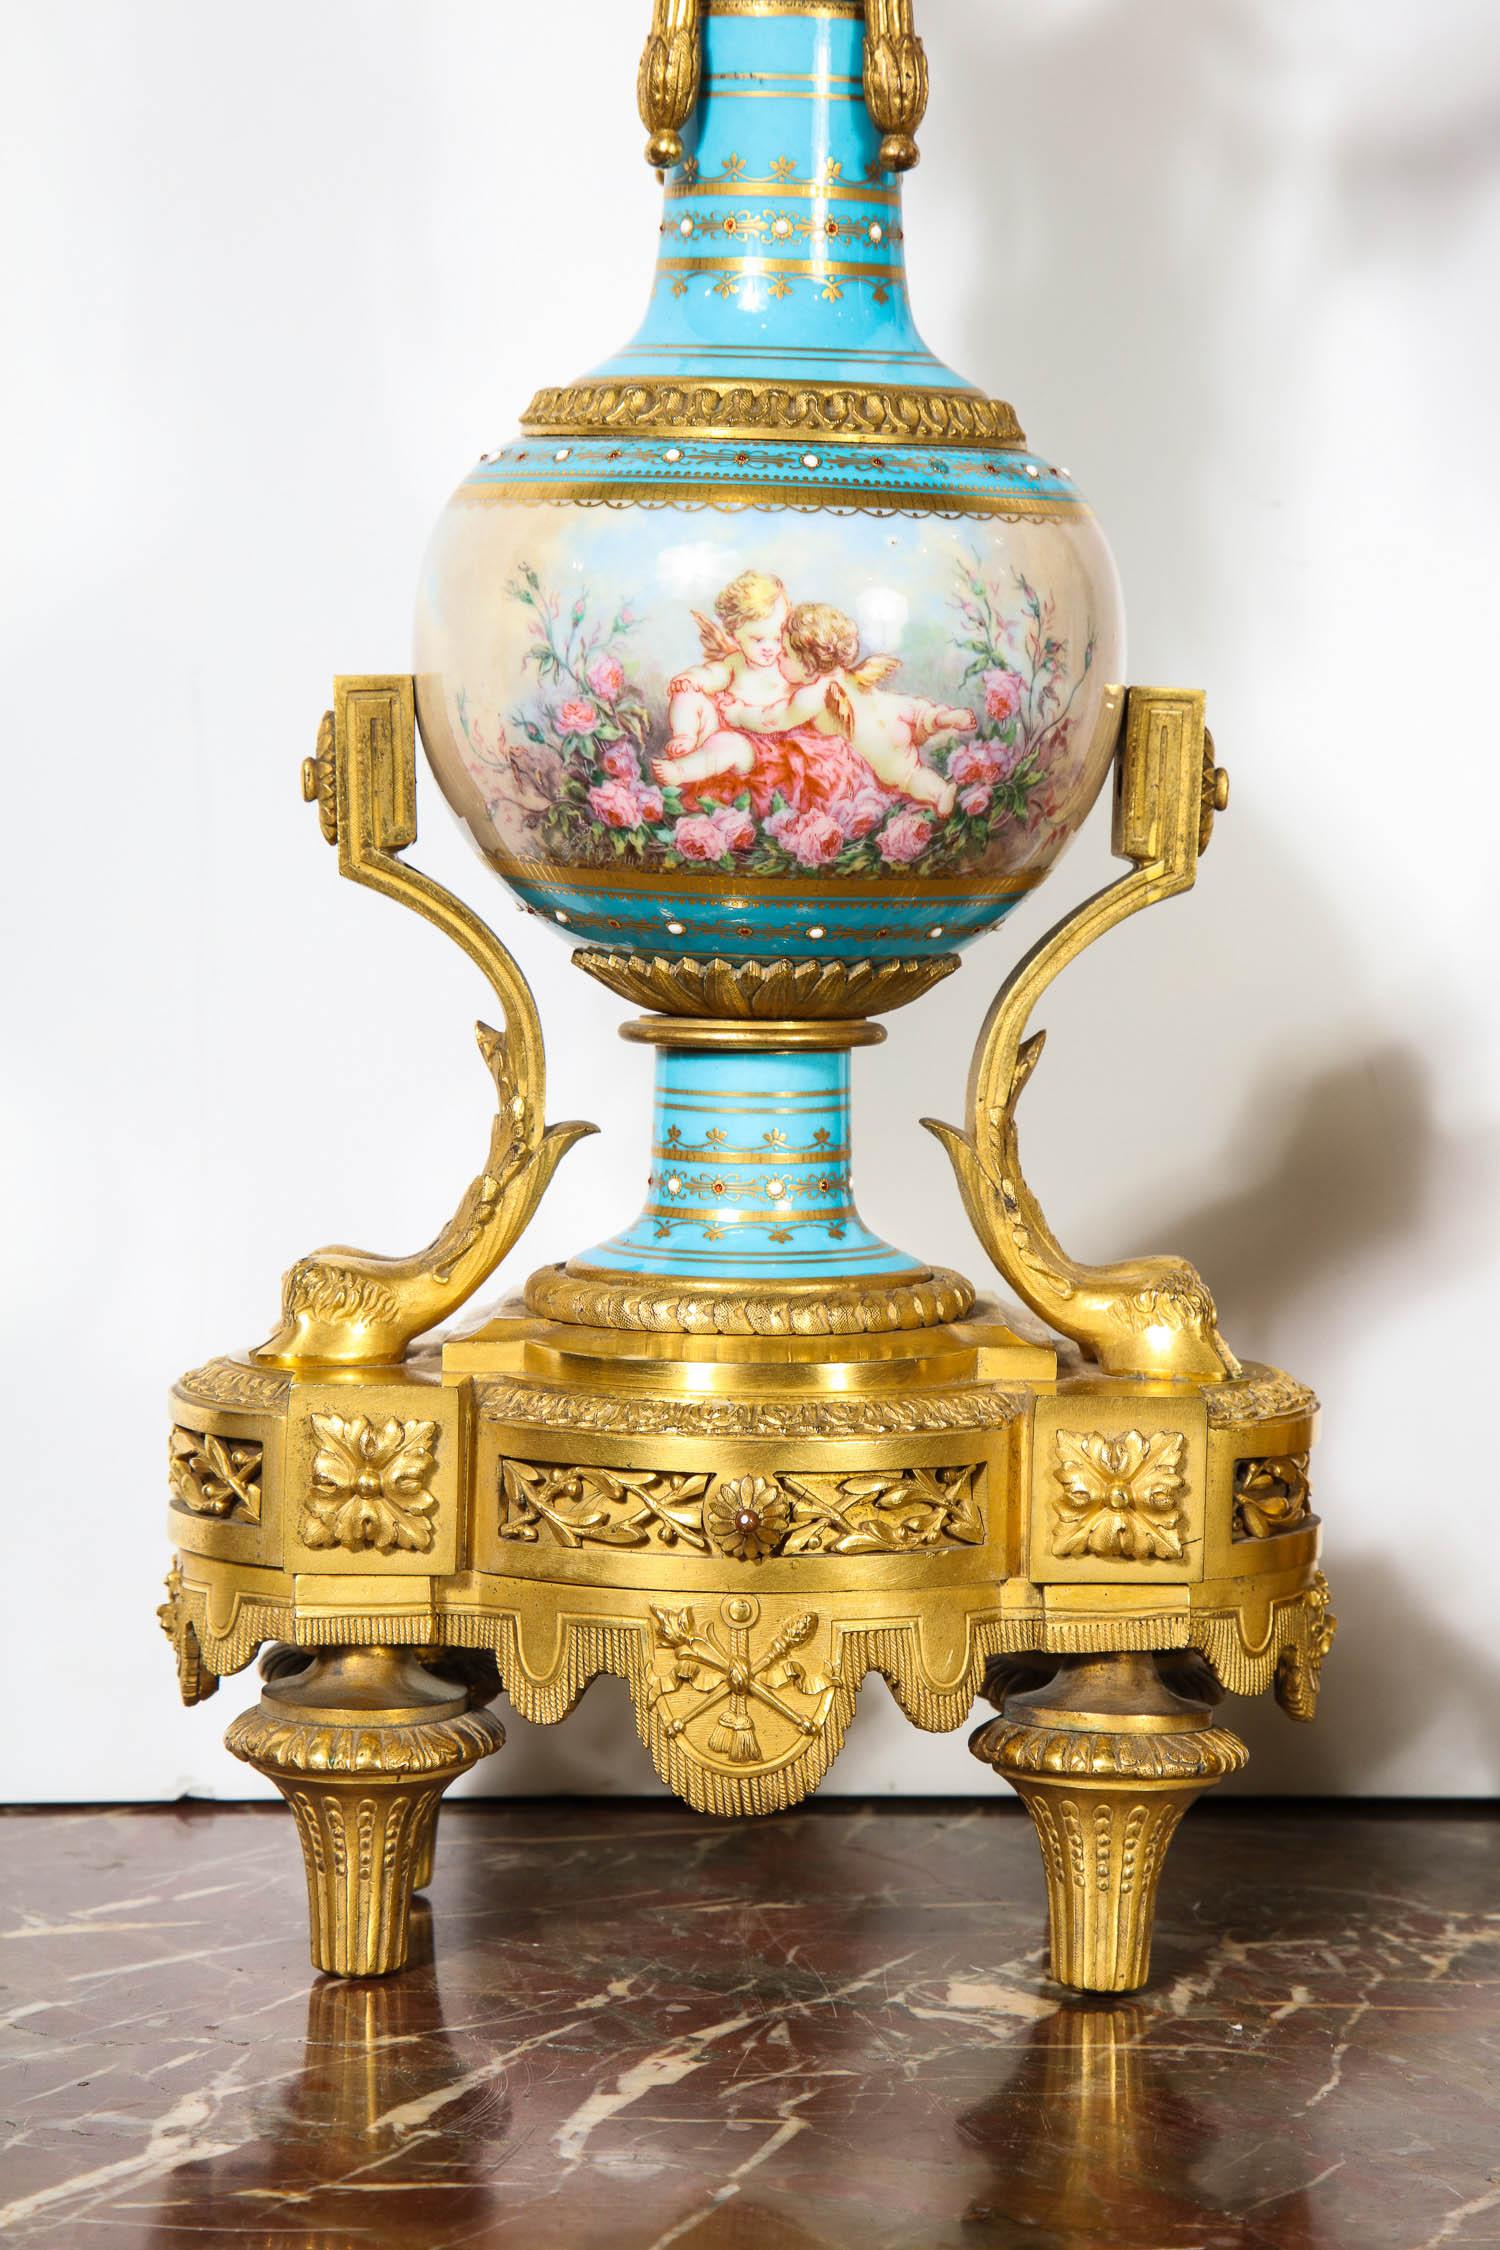 Bronze Exceptional French Ormolu-Mounted Turquoise Jeweled Sevres Porcelain Clock Set For Sale